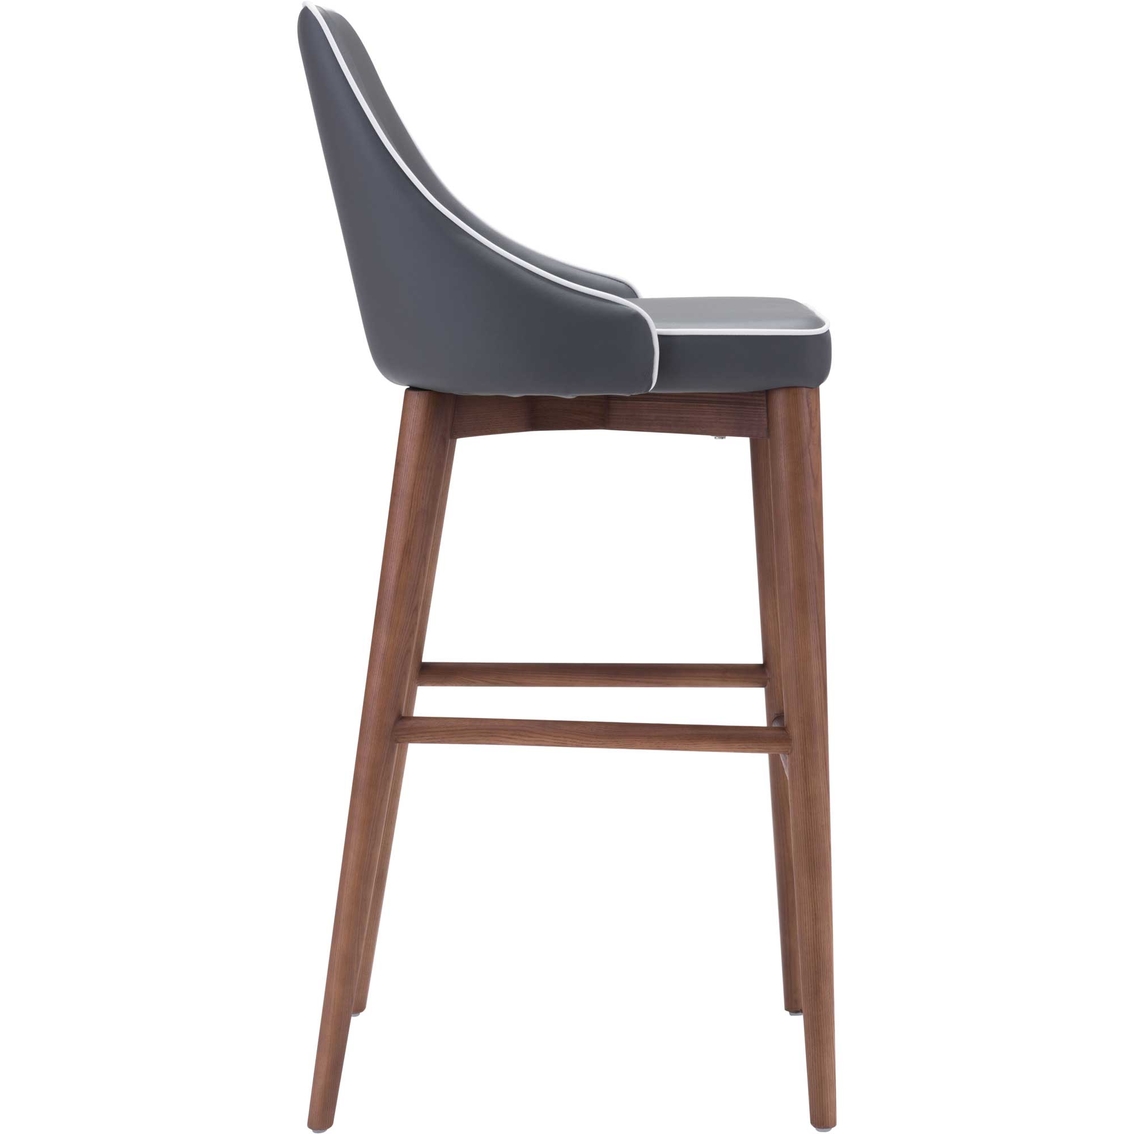 Zuo Moor Bar Chair - Image 2 of 8